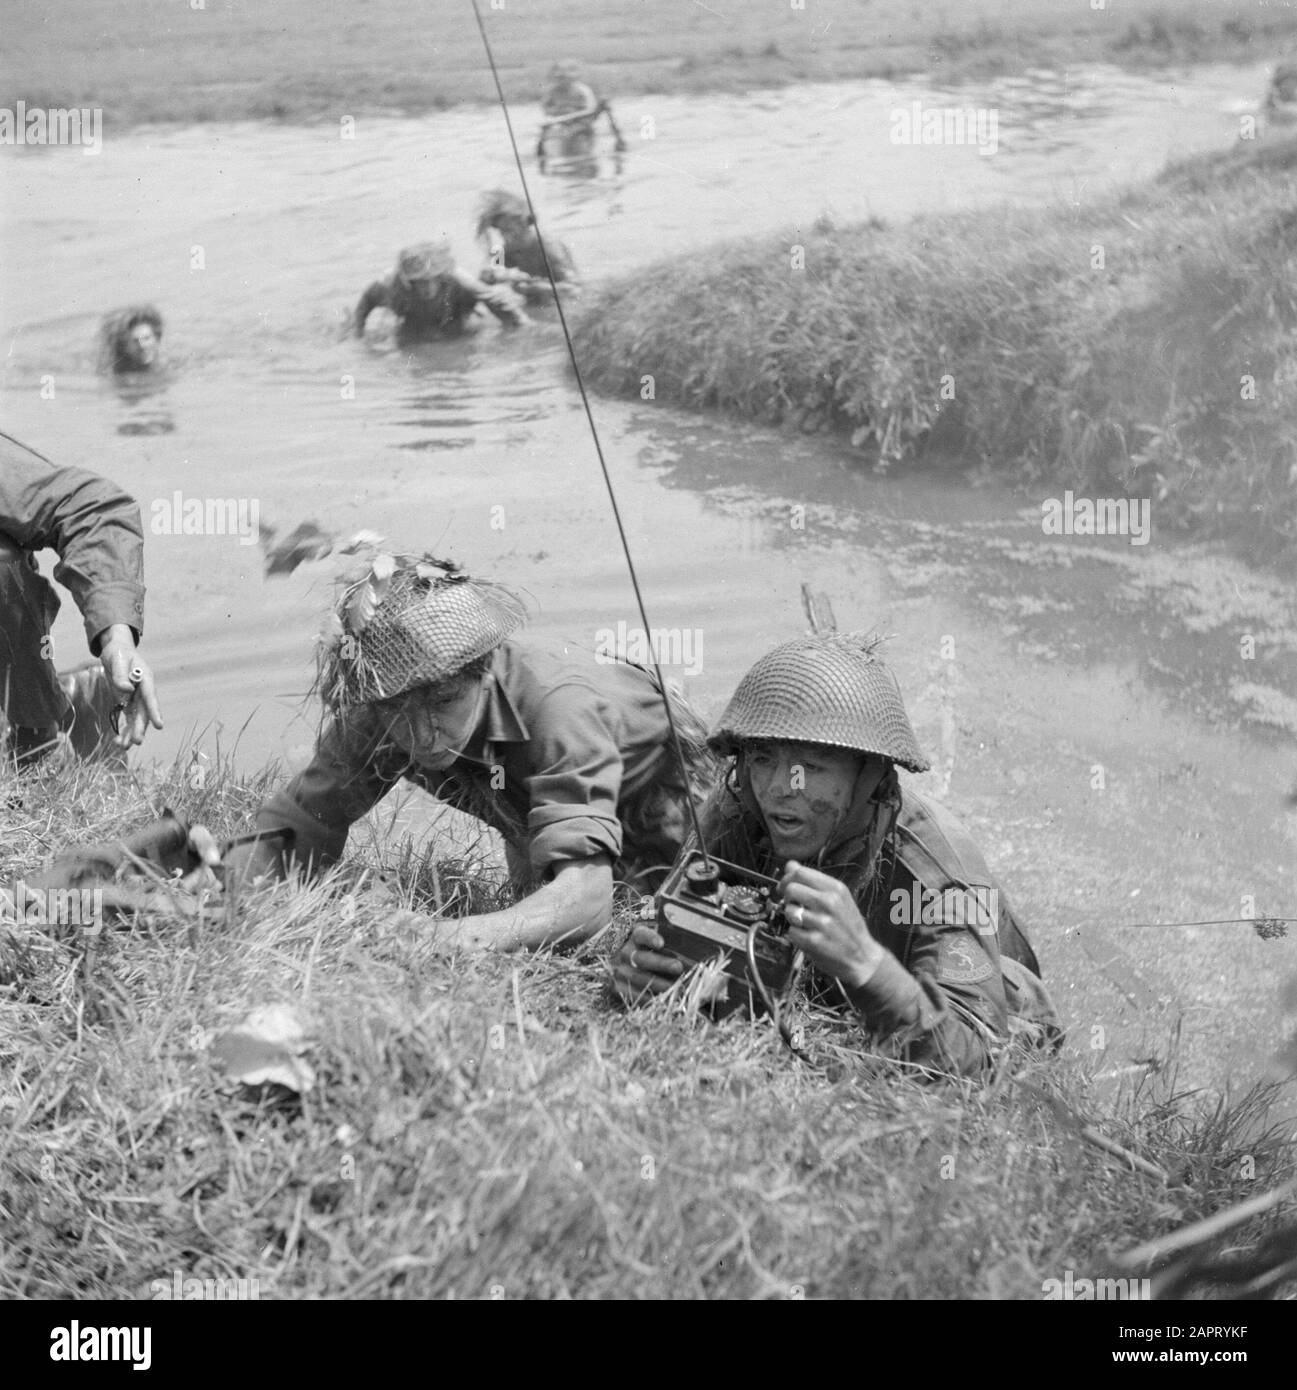 Military Reportage  A military exercise. A river must be crossed. Working on the crossing. A radio telegraphist at work Date: 1939 Keywords: military exercises Stock Photo